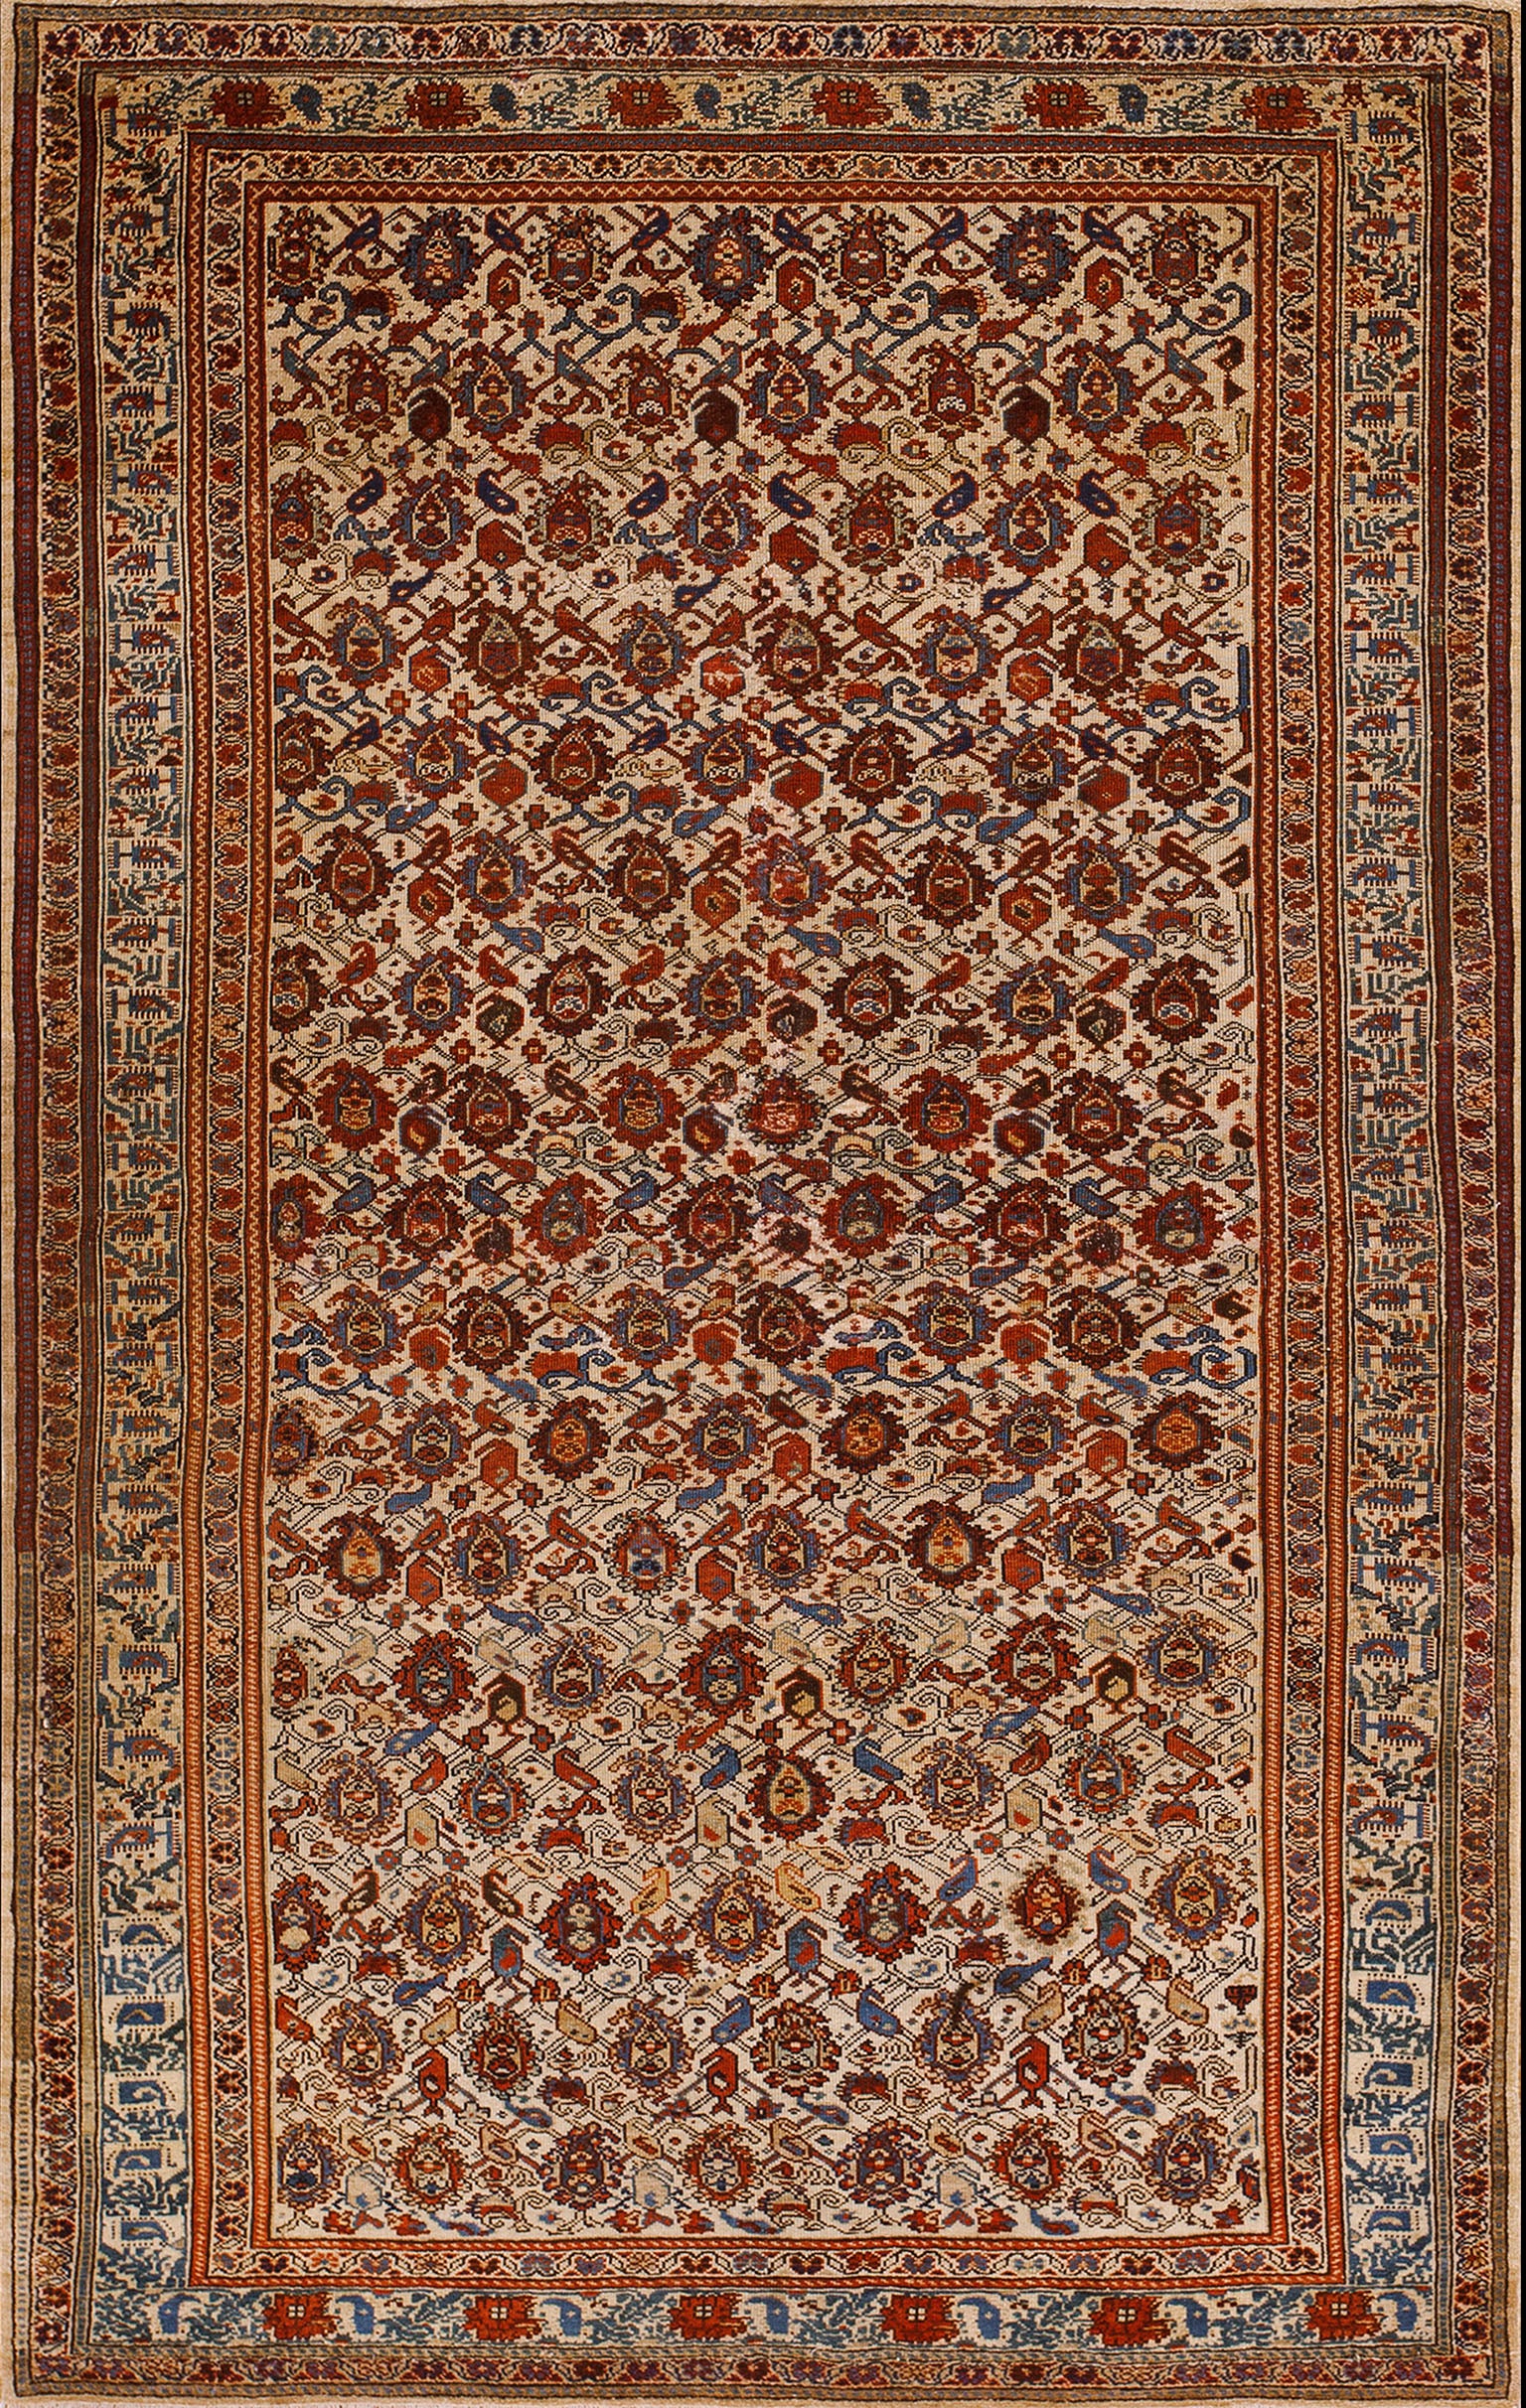 19th Century Persian Mishan Malayer Paisley Carpet ( 4'2" x 6'6" - 127 x 198 ) For Sale